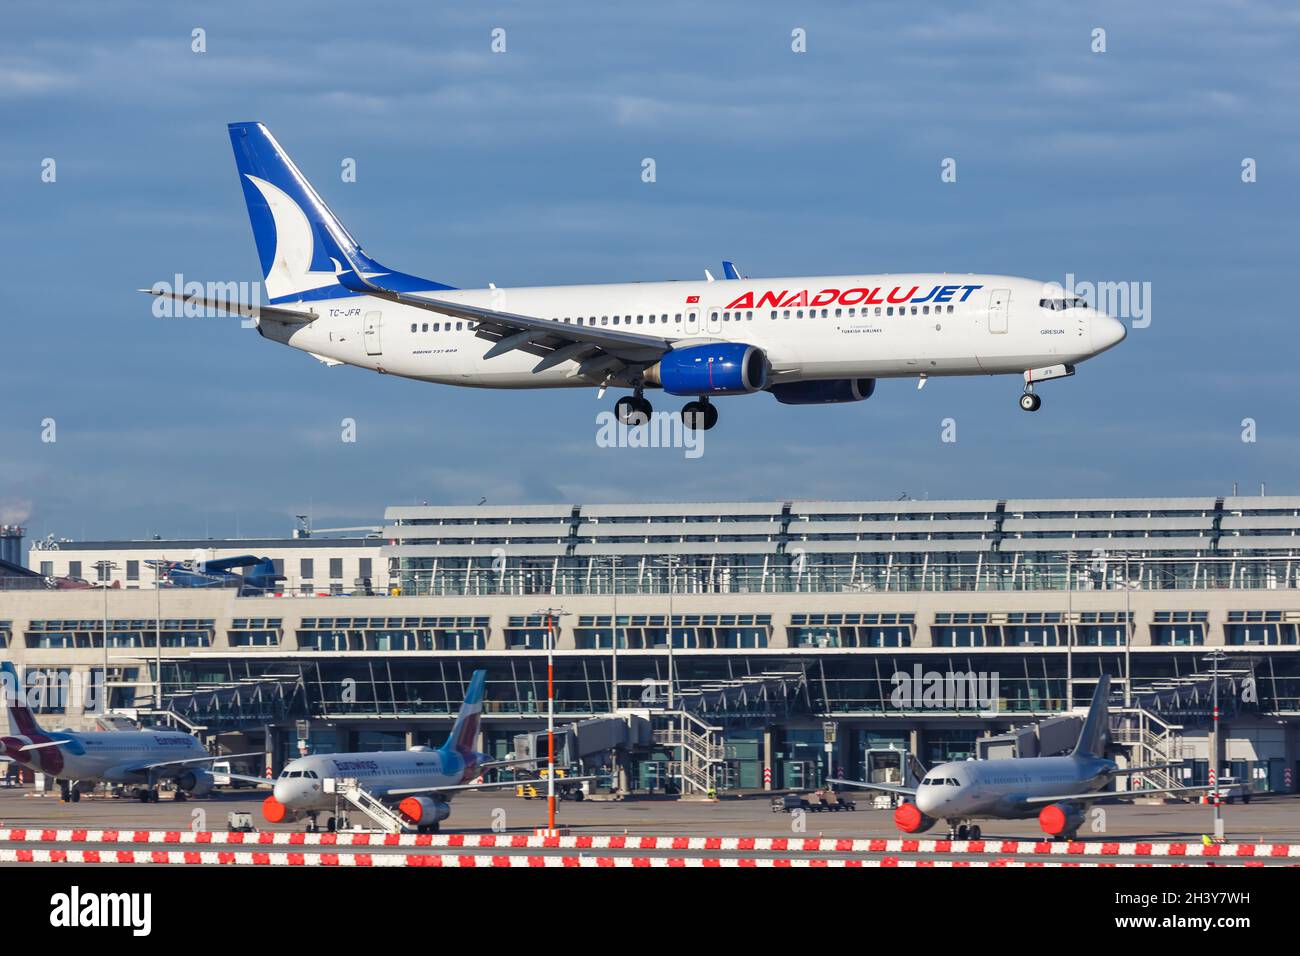 AnadoluJet Boeing 737-800 aircraft Stuttgart Airport in Germany Stock Photo